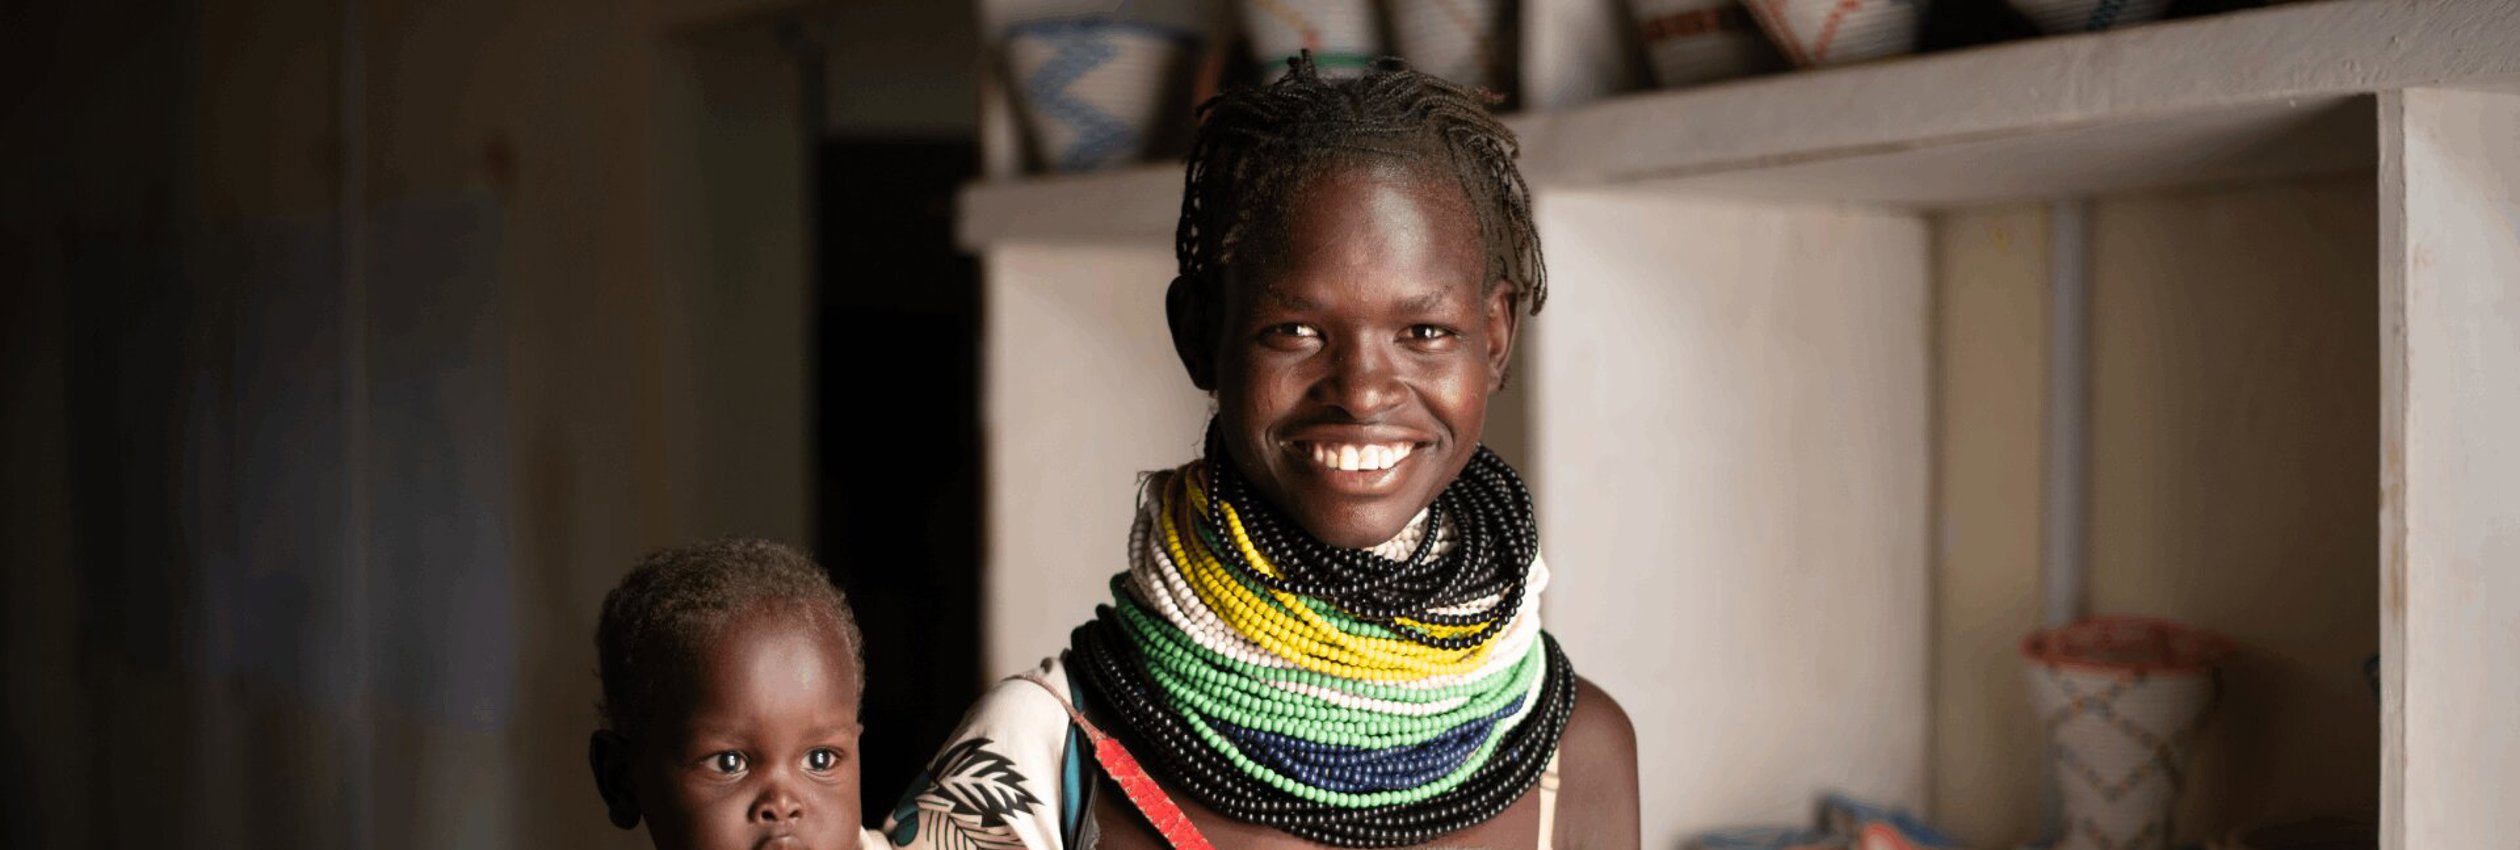 Lucy Akai, a Kenya woman, holds her baby and smiles at the camera. She is wearing brightly coloured beaded jewelery.